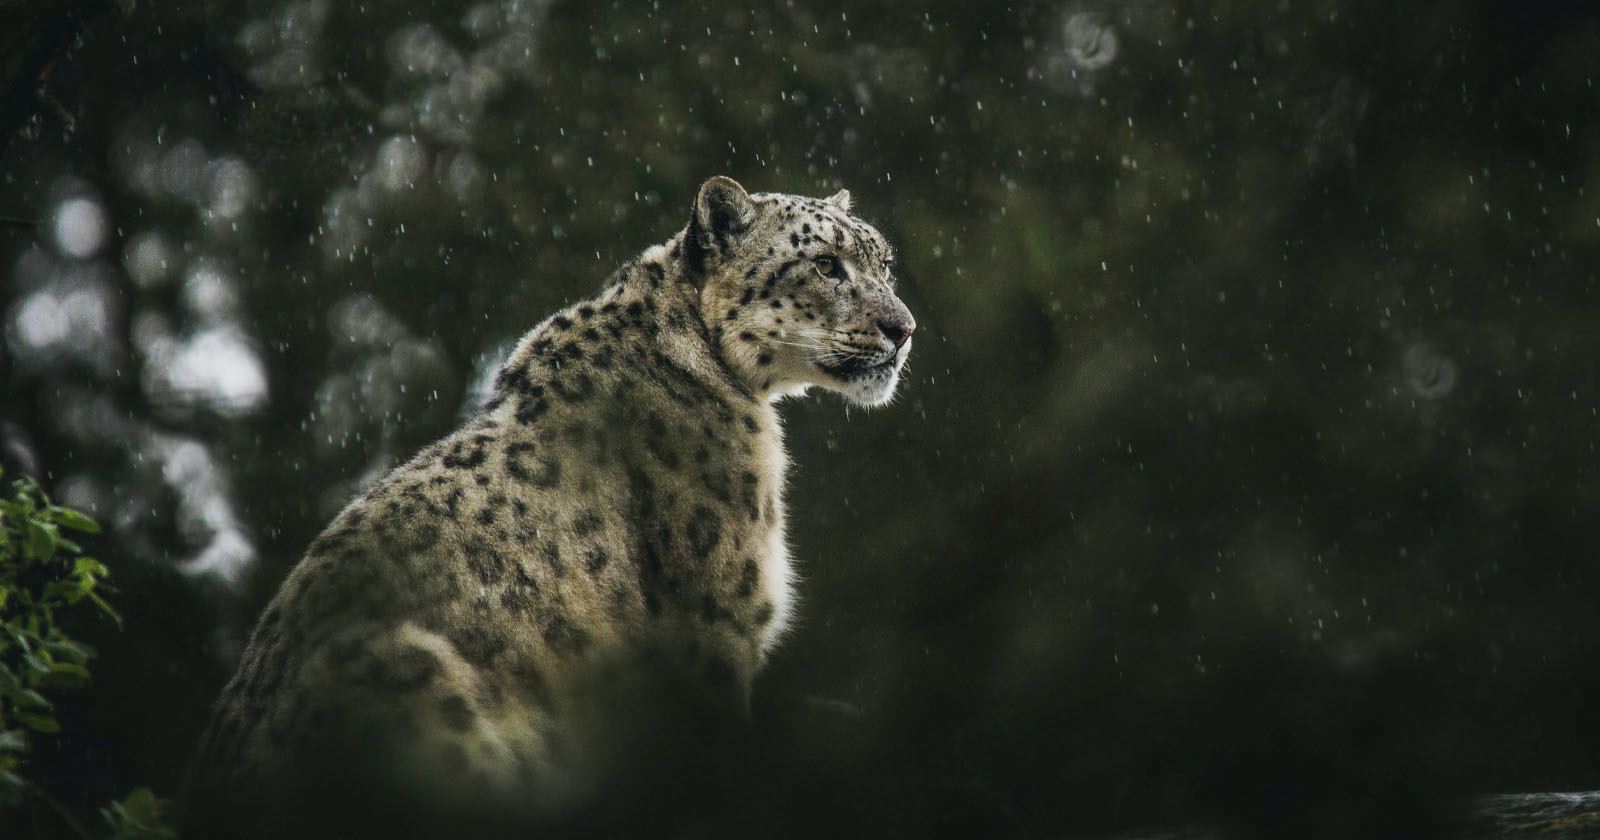  how fake snow leopard photo sparked debate ethics 